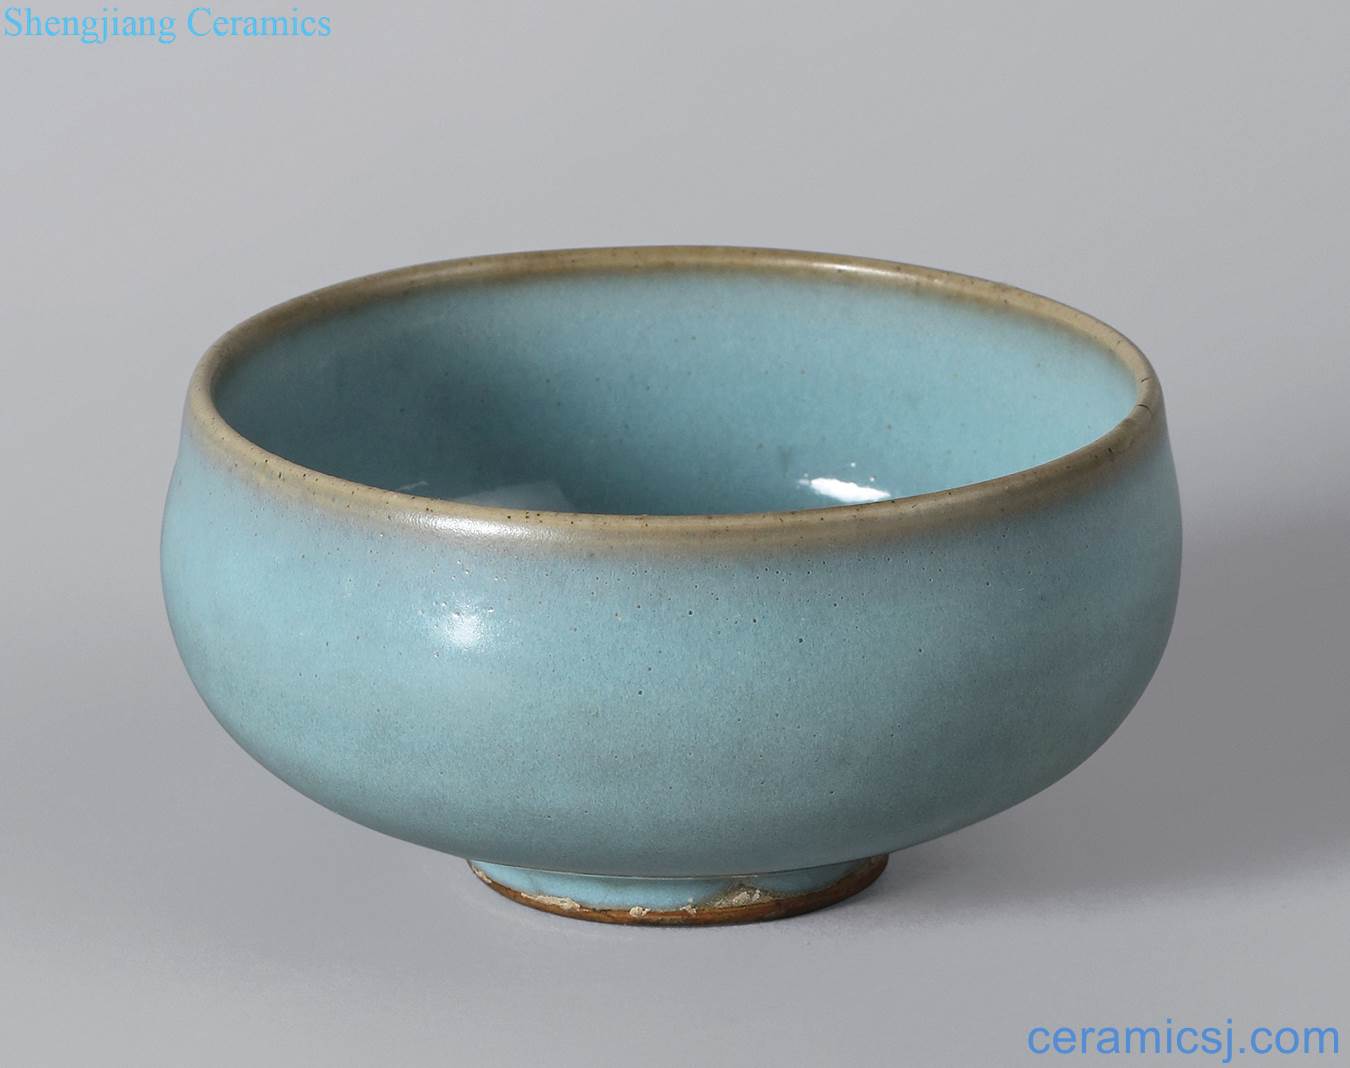 Northern song dynasty (960-1127) and gold (1115-1234), the sky blue glaze masterpieces in the bowl